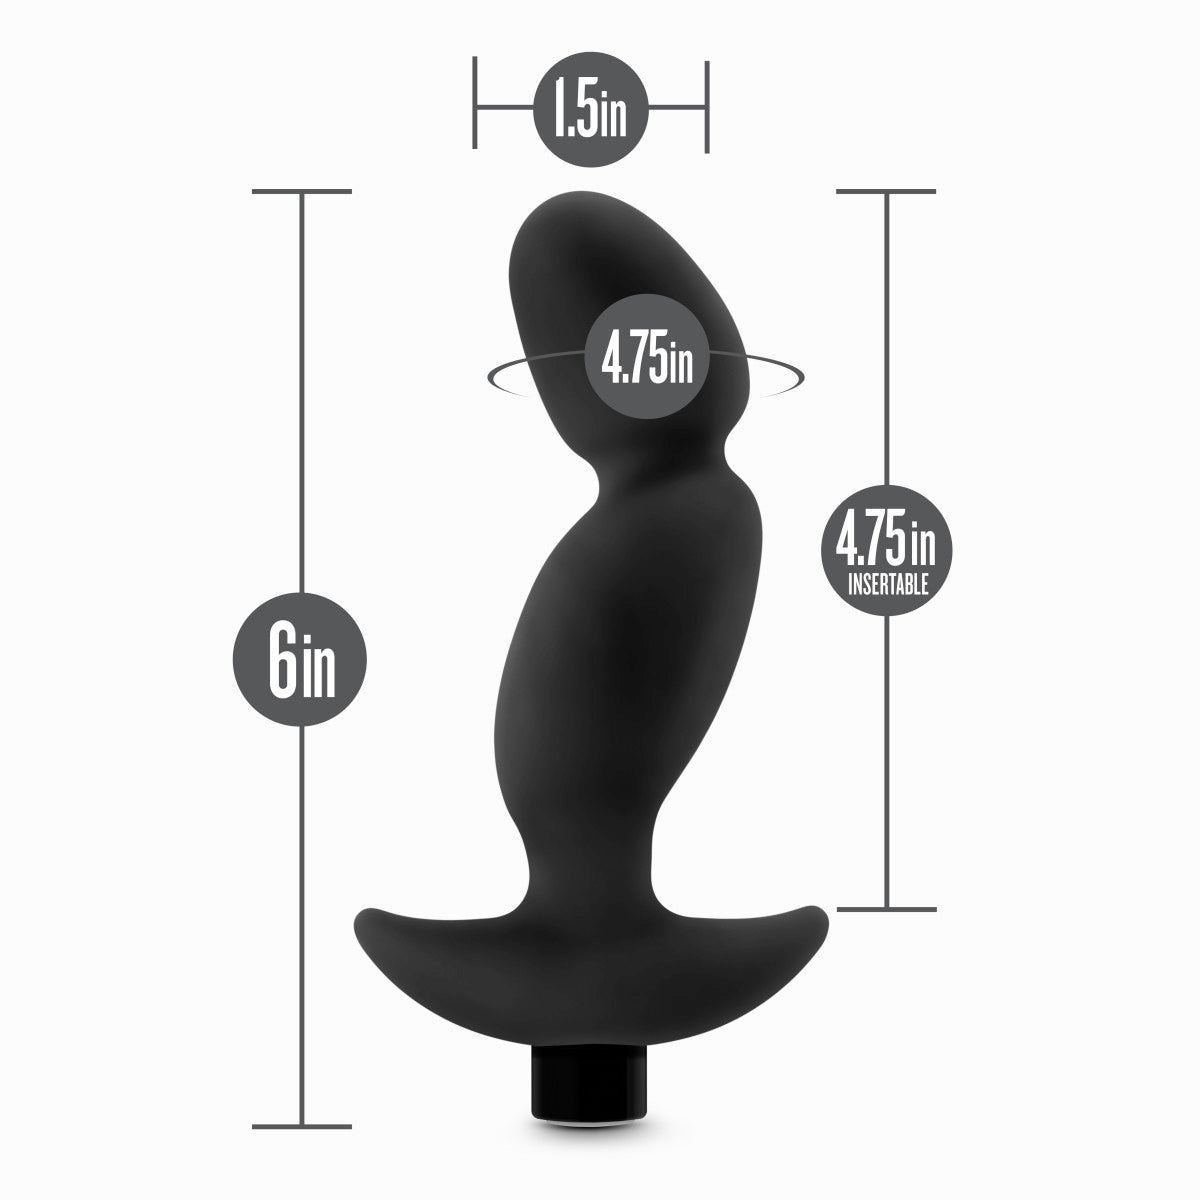 Anal Adventures Platinum Prostate Massager 04  Black 6.5-Inch Vibrating Rechargeable Anal Plug